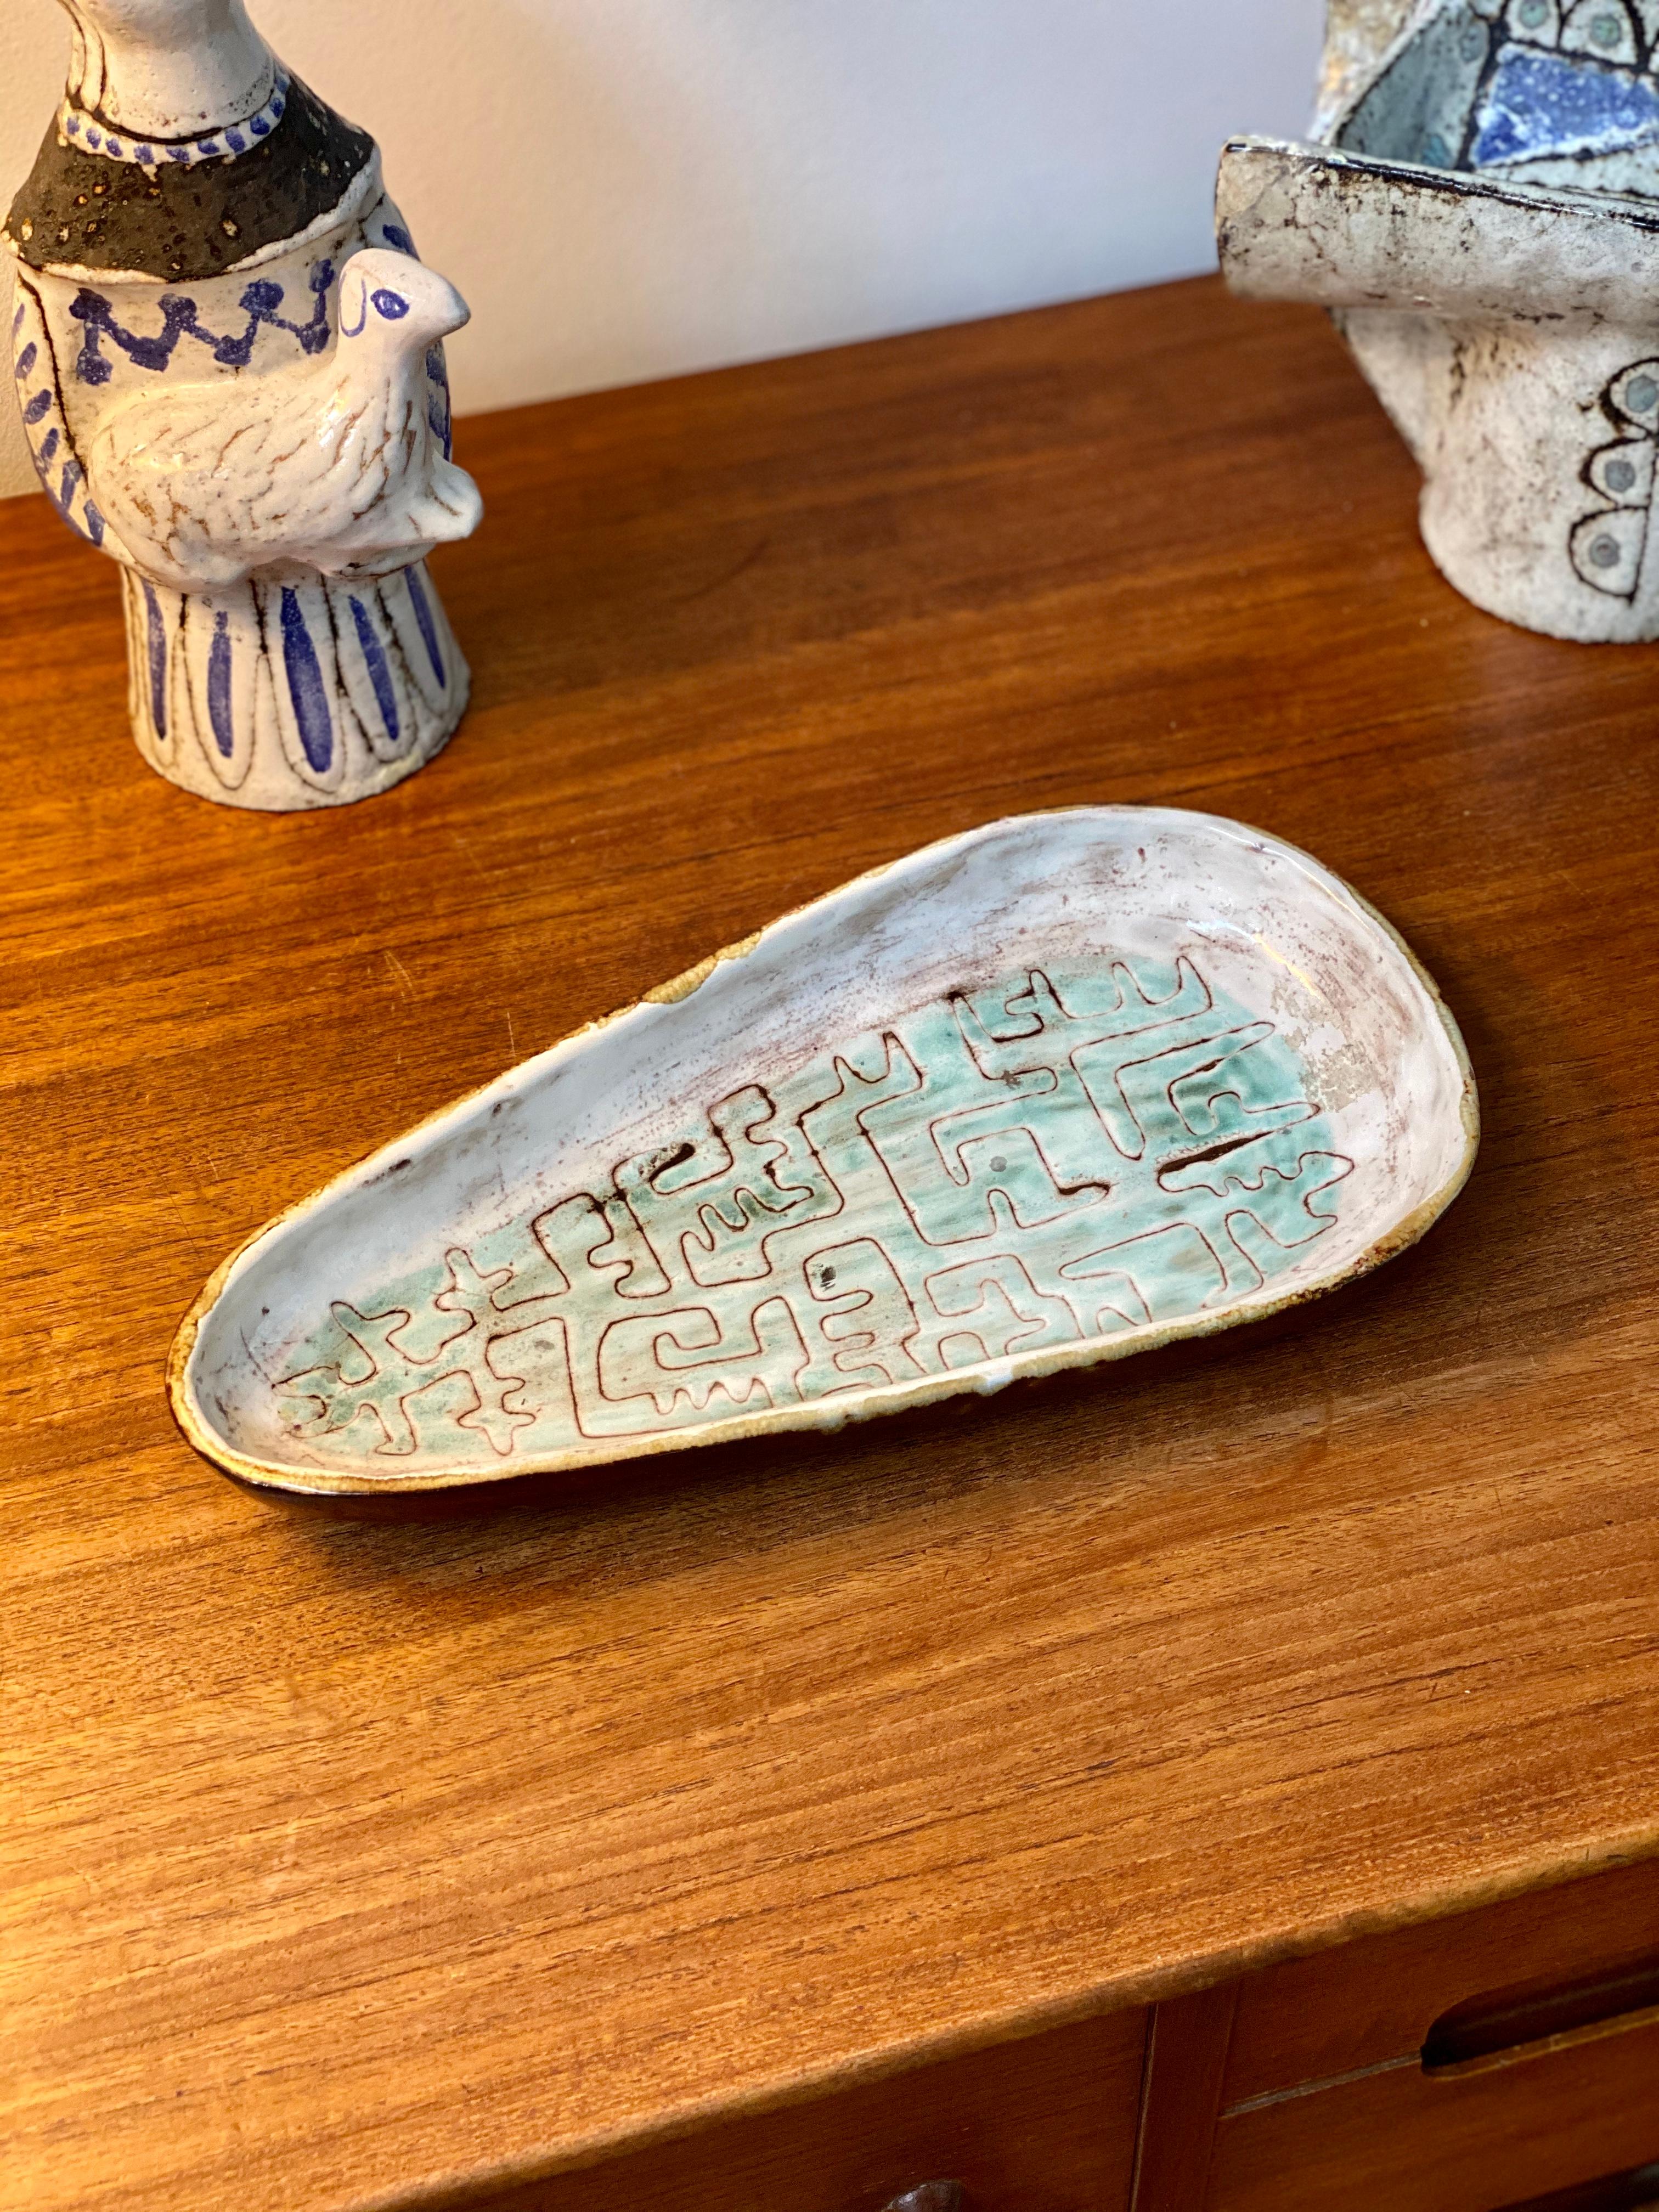 Midcentury French ceramic dish / vide-poche by Jean Rivier, circa 1960s. A softened-edge triangular shaped dish / vide-poche of enamel with a modern linear decoration reminiscent of a labyrinth or graffiti. It may also remind one of Keith Haring's